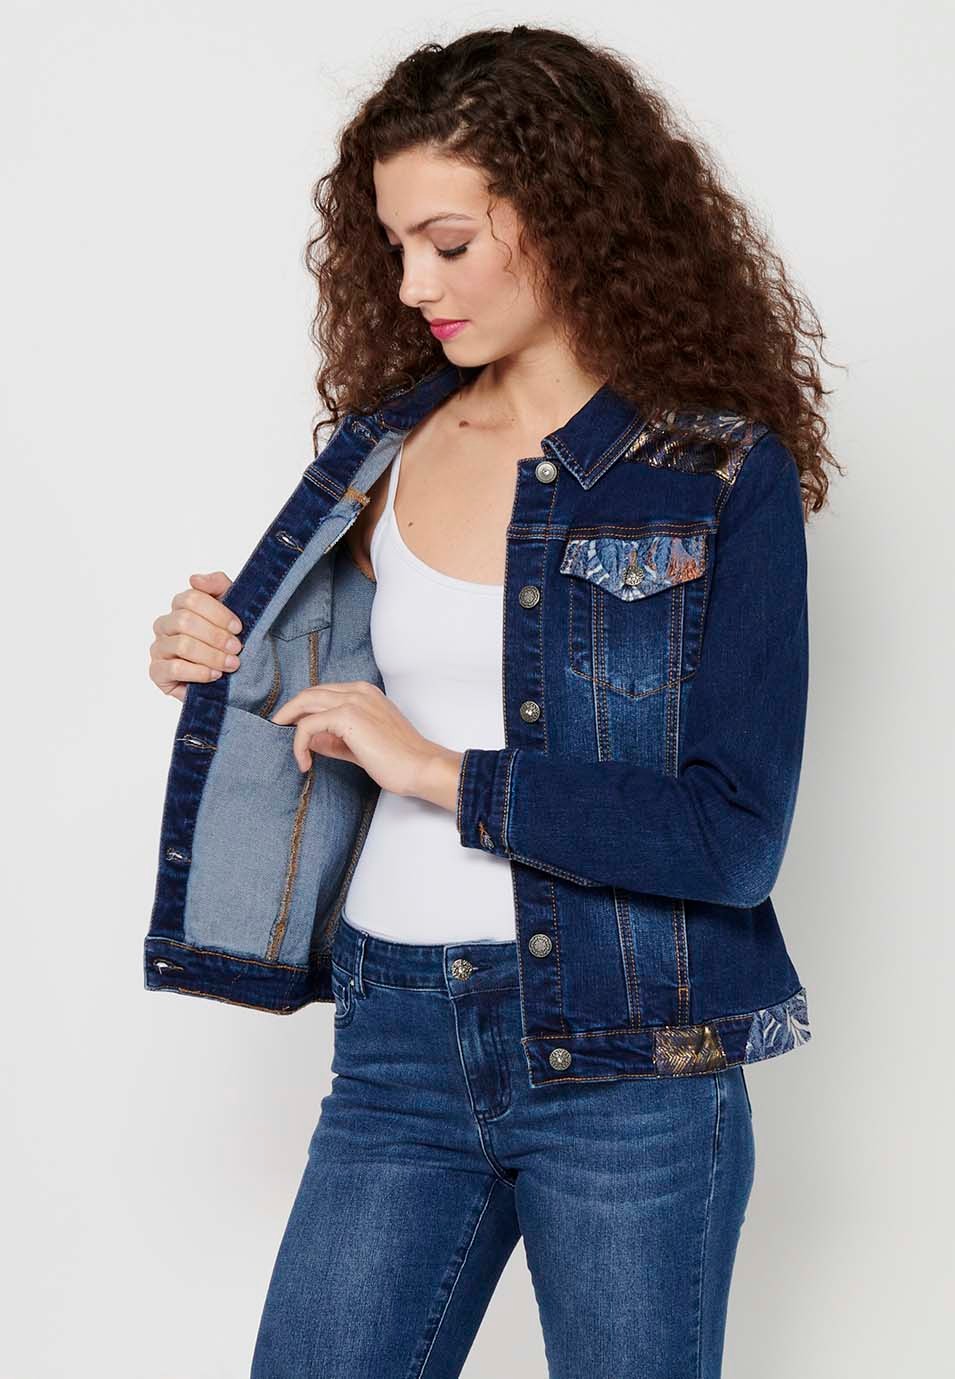 Dark Blue Long Sleeve Denim Jacket with Button Front Closure and Pockets with Embroidery on the Shoulders for Women 11